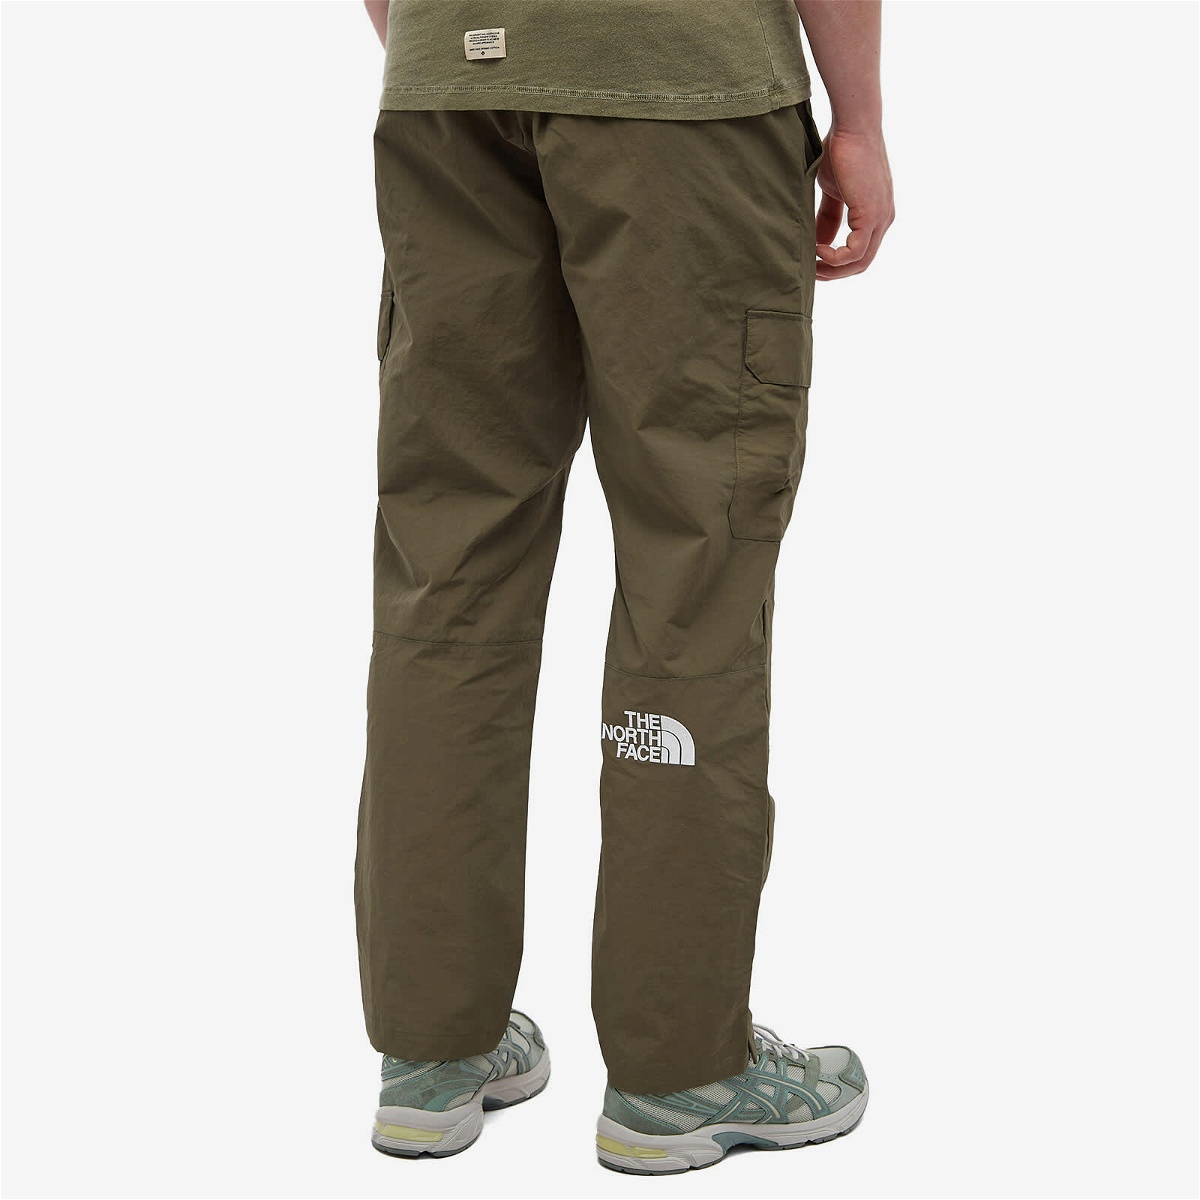 Cargo pants - the north face puffer | North face puffer, The north face  puffer, Winter jackets